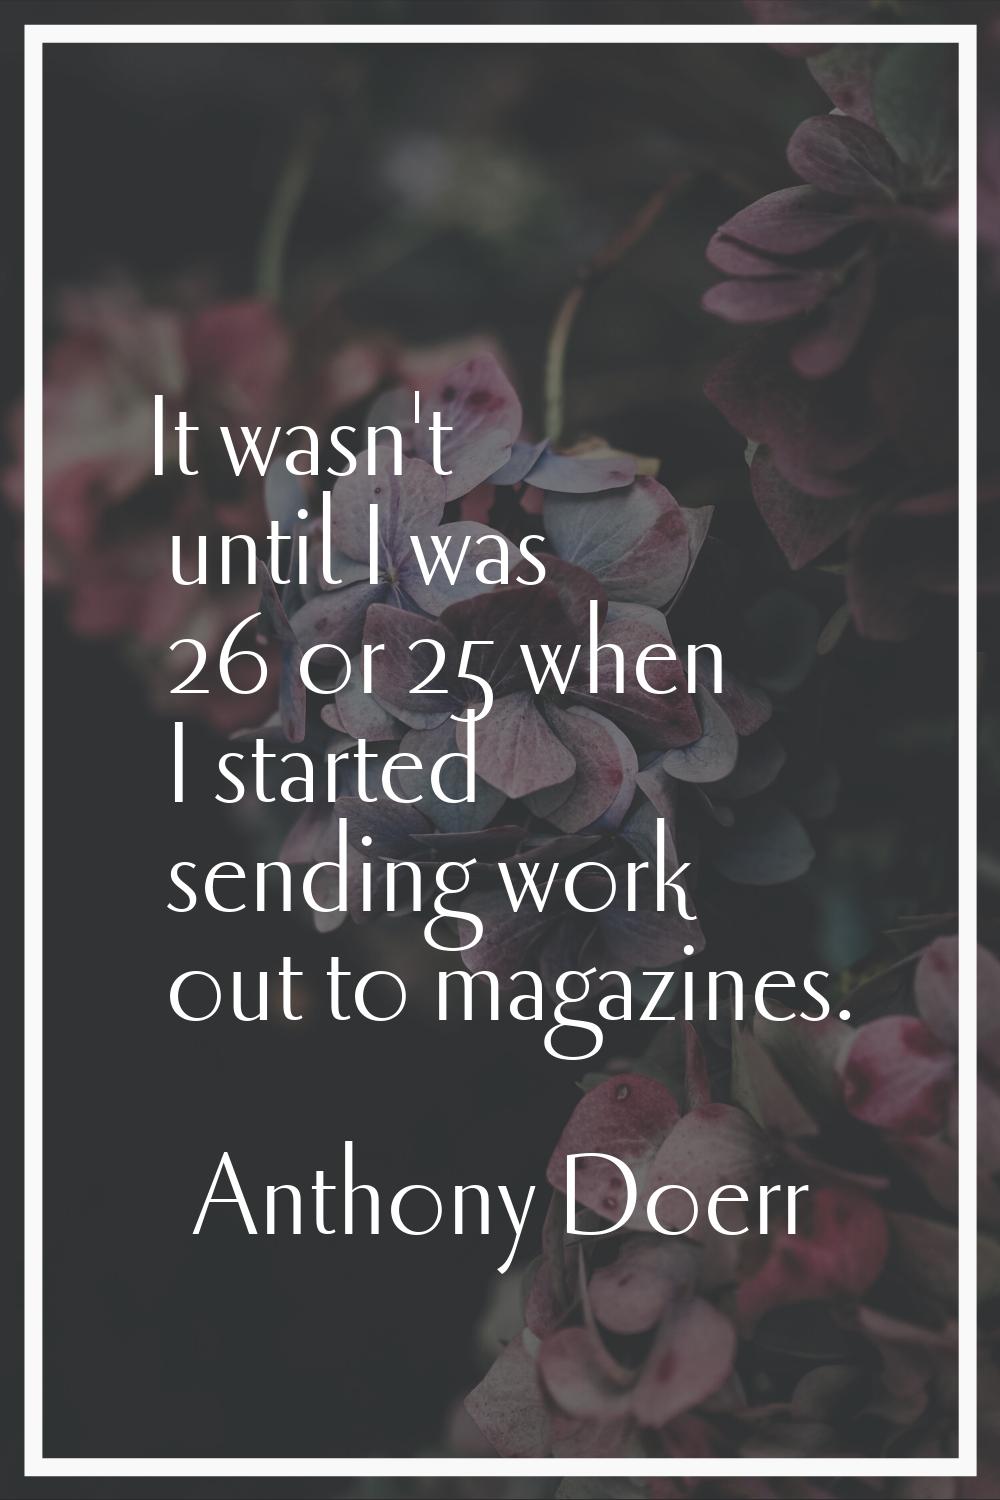 It wasn't until I was 26 or 25 when I started sending work out to magazines.